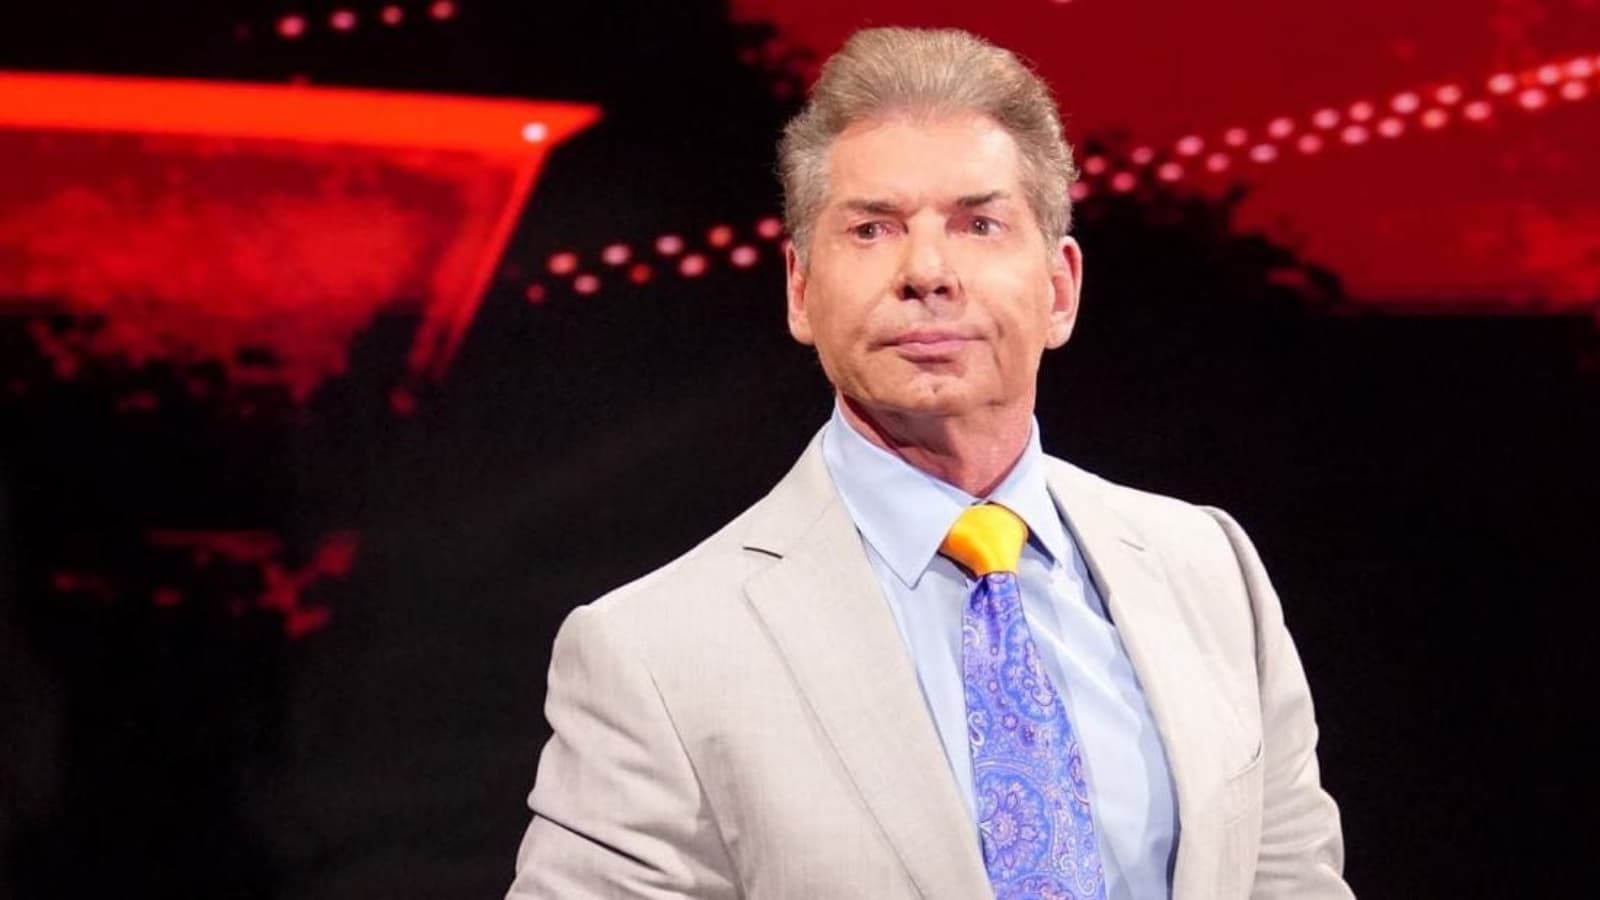 Andrew Tate and Vince McMahon networth comparison: who is richer between the famous internet personality and the WWE boss?